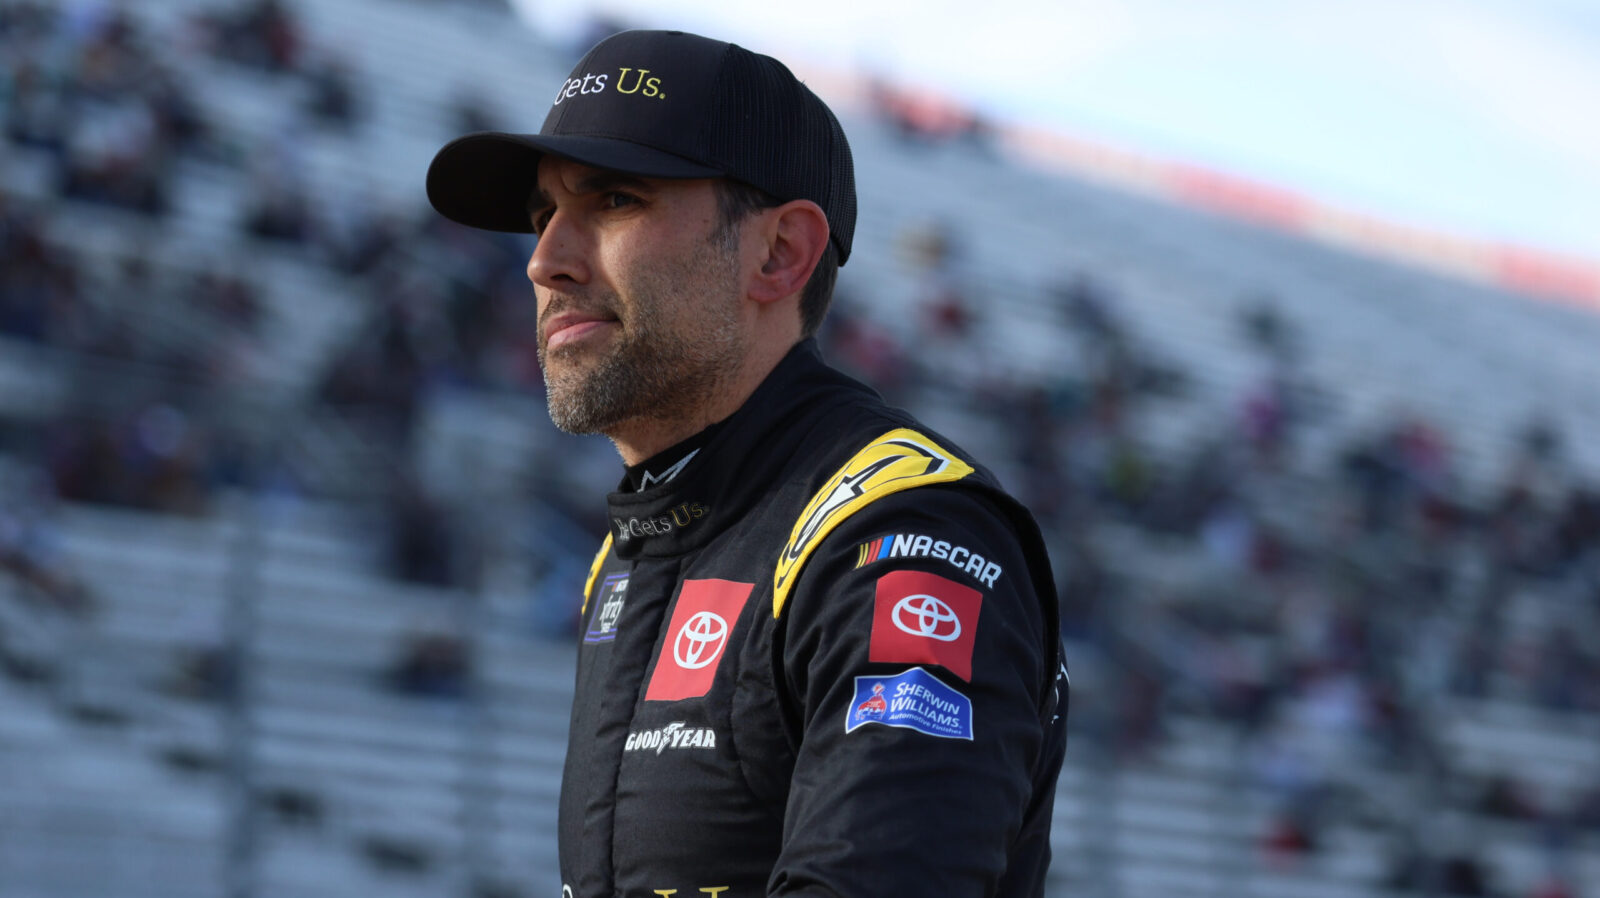 Aric Almirola has not been released by Joe Gibbs Racing will compete in NASCAR Xfinity race at Indianapolis Motor Speedway